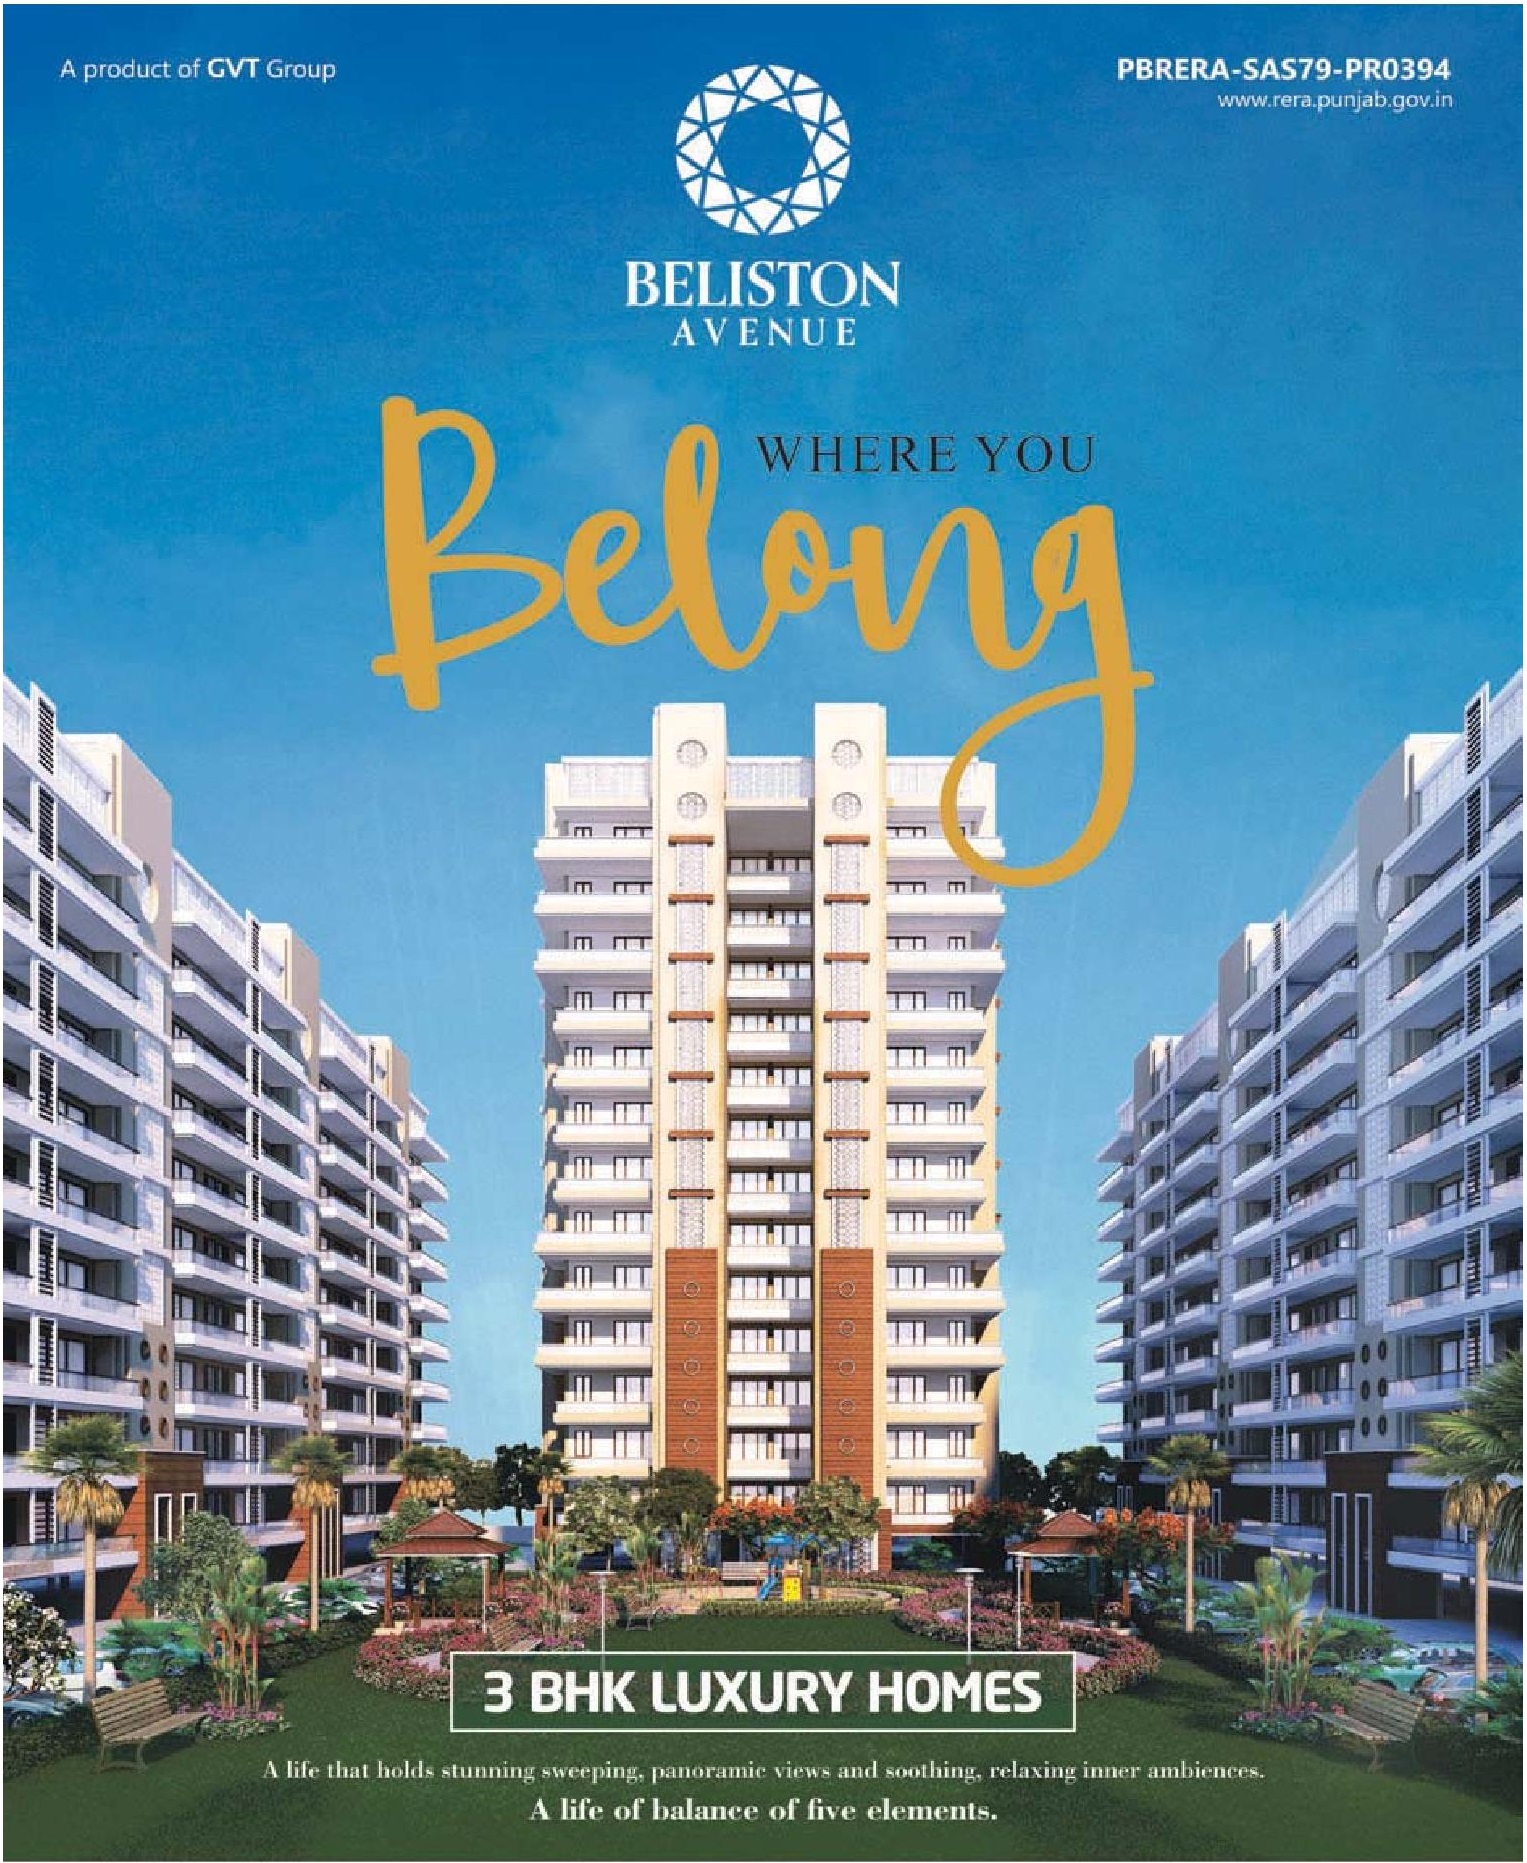 Book 3 bhk luxury homes at GVT Beliston Avenues in Gazipur, Mohali